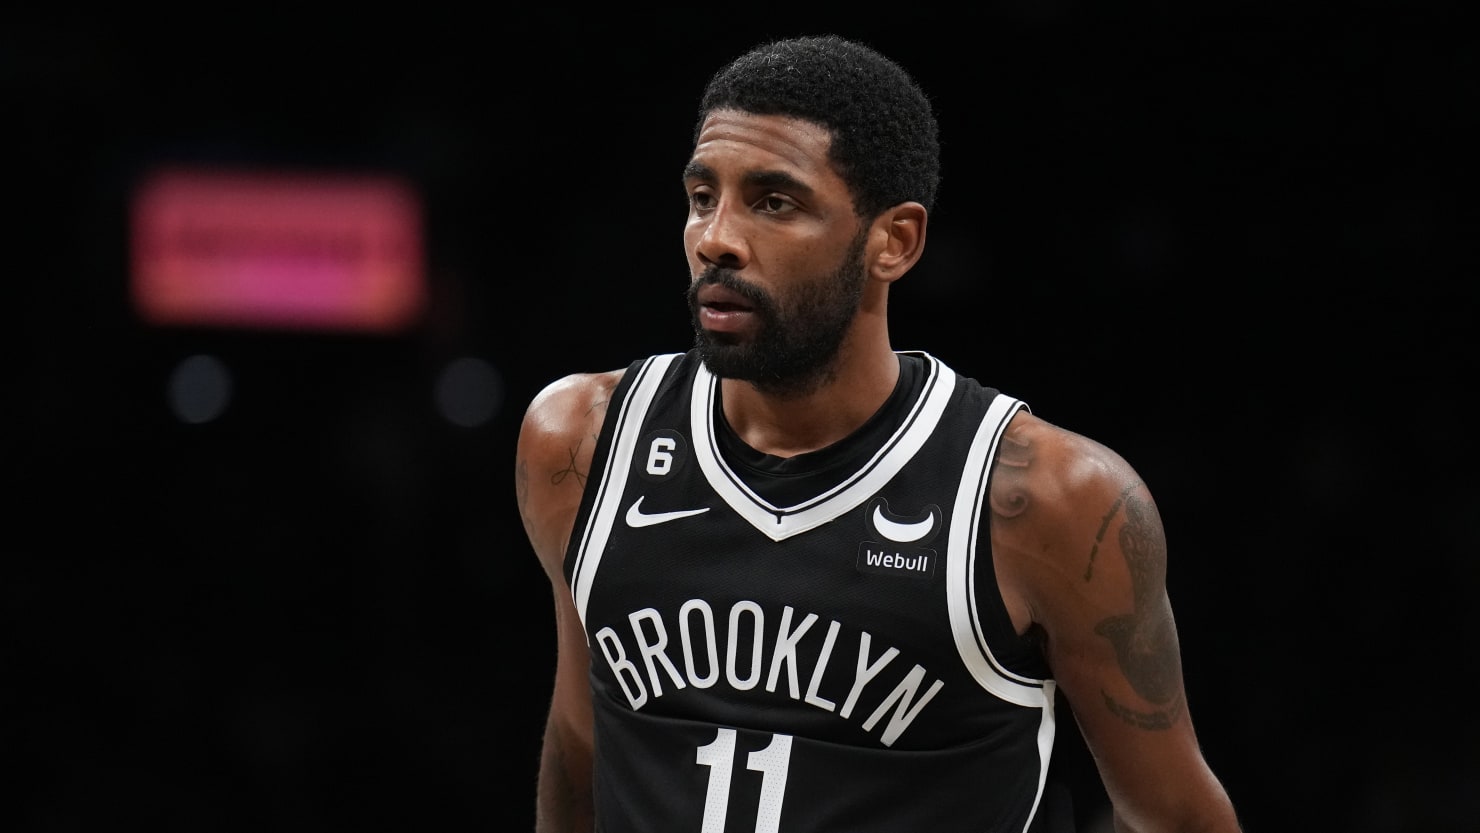 Kyrie Irving is seen outside Coach during New York Fashion Week News  Photo - Getty Images